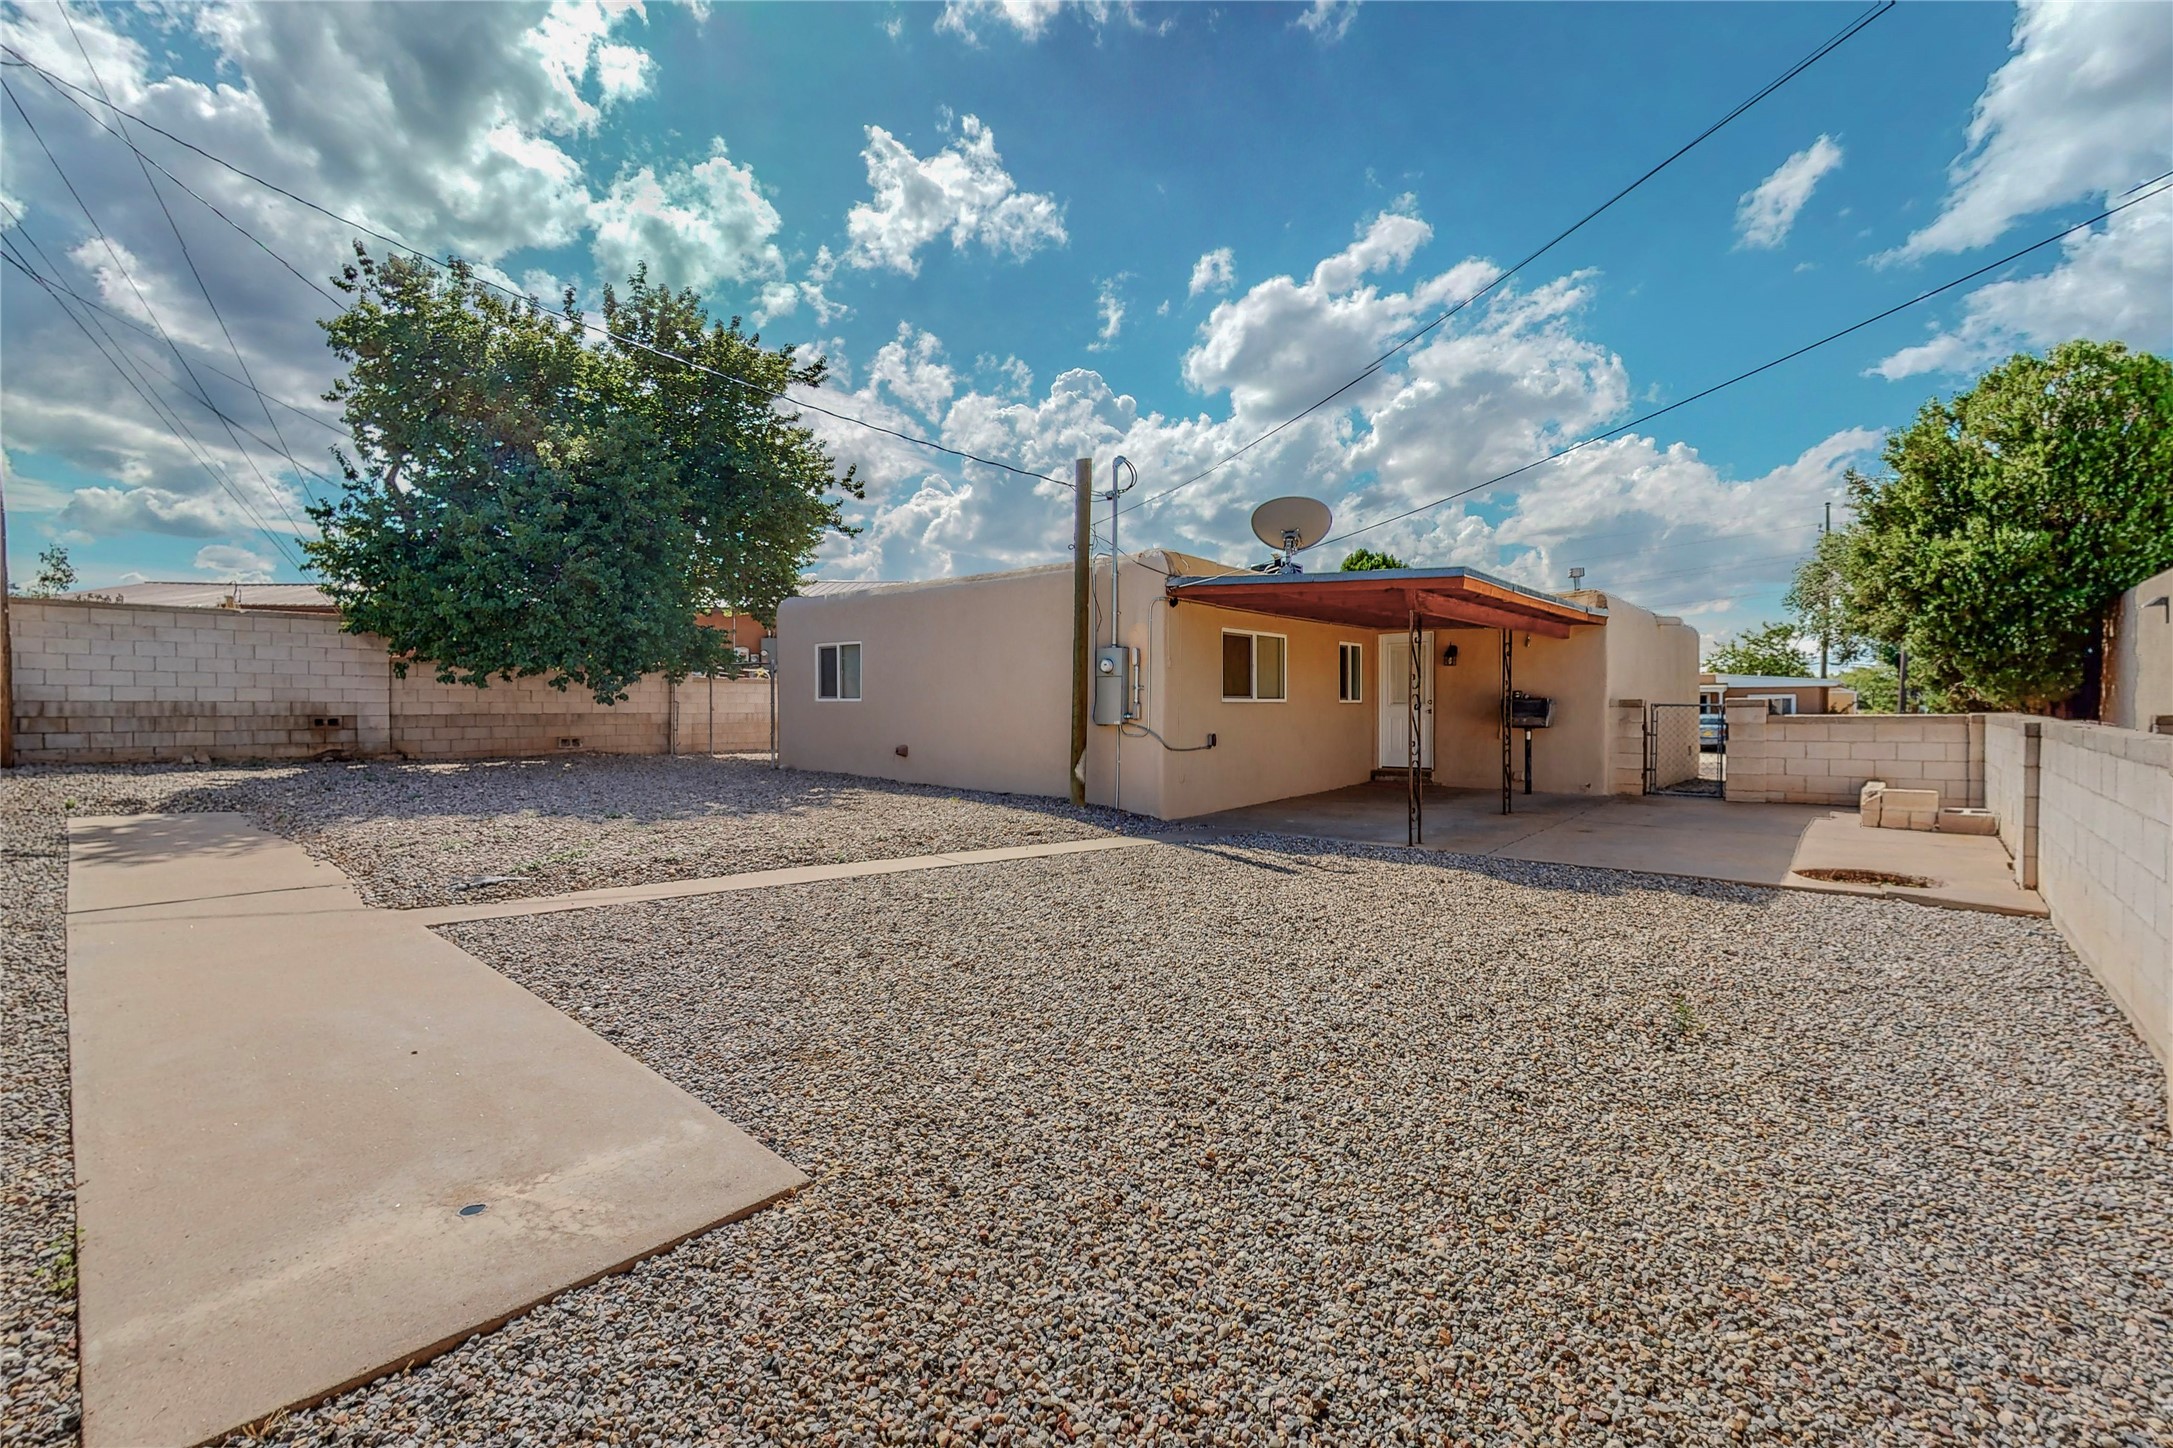 1014 Valerie Circle, Santa Fe, New Mexico 87507, 3 Bedrooms Bedrooms, ,1 BathroomBathrooms,Residential,For Sale,1014 Valerie Circle,202232797